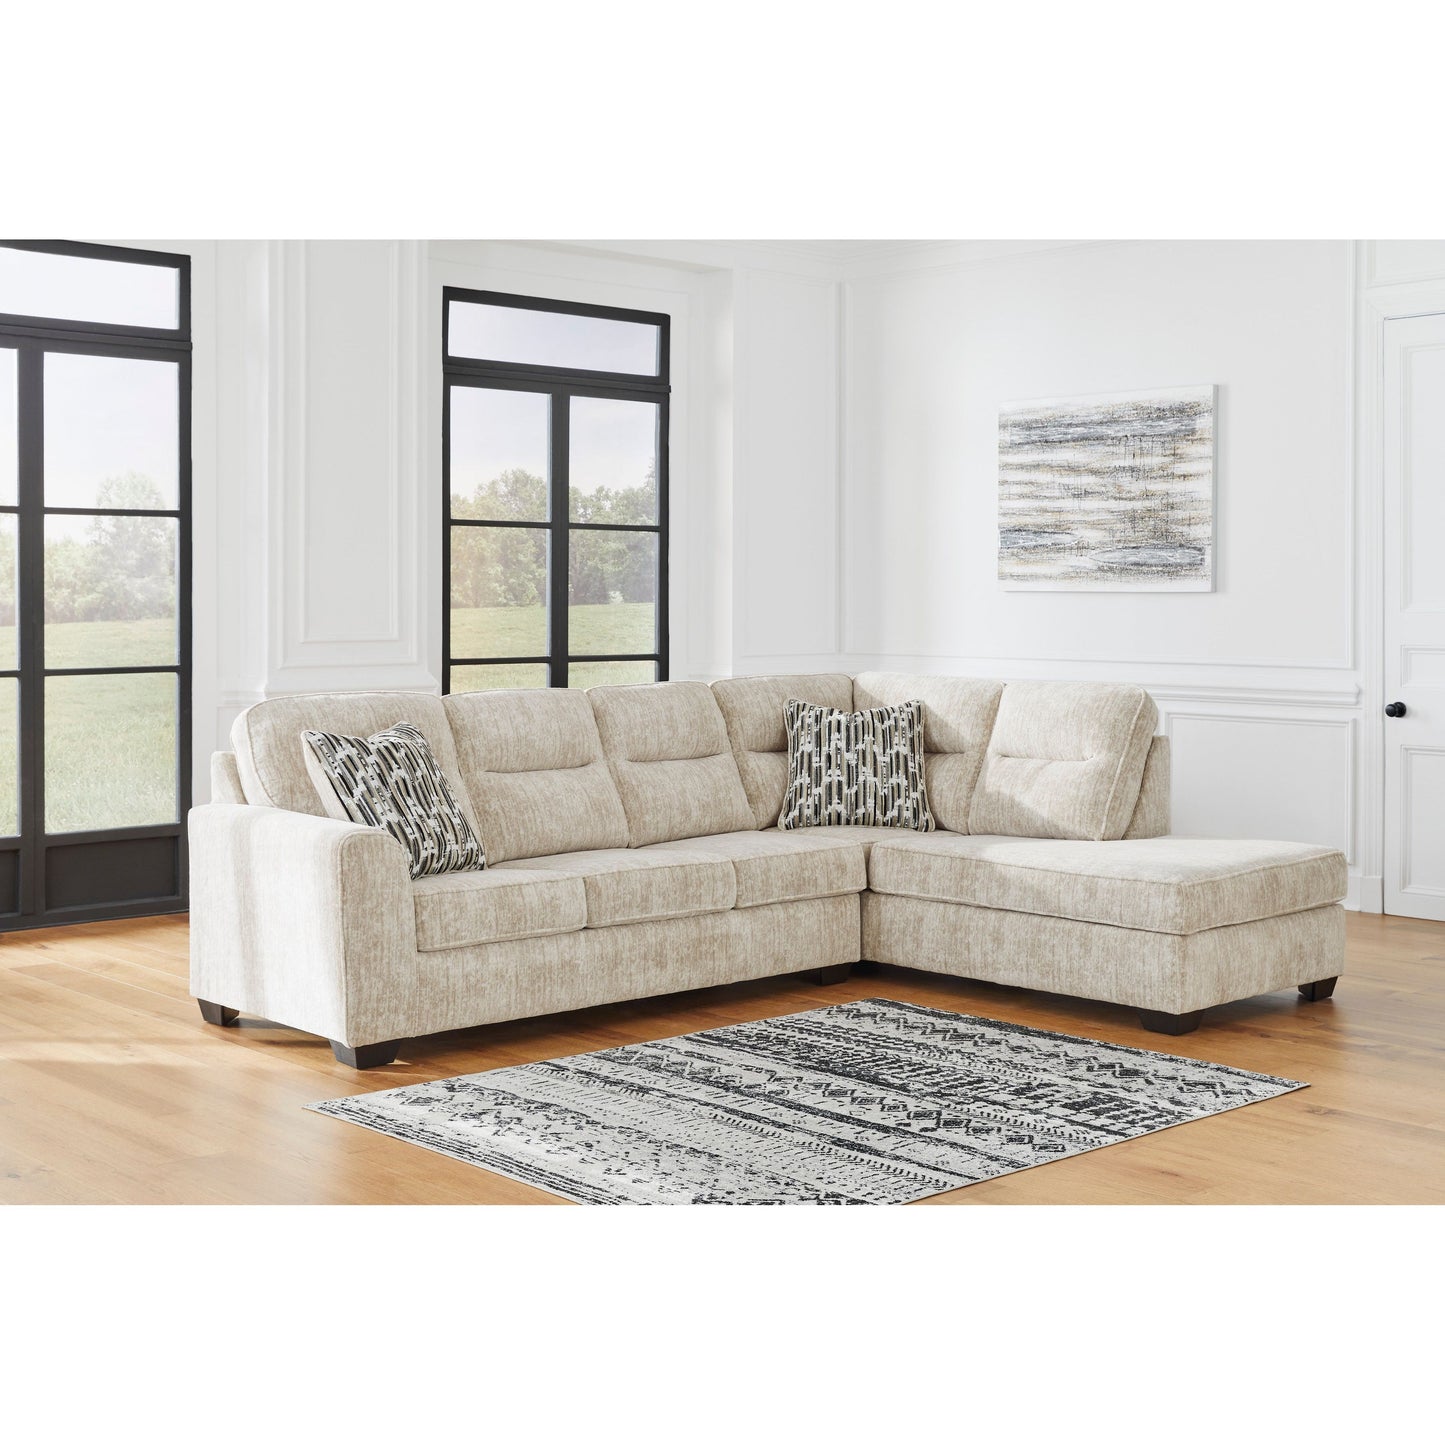 LONOKE 2 PIECE SECTIONAL WITH CHAISE - PARCHMENT